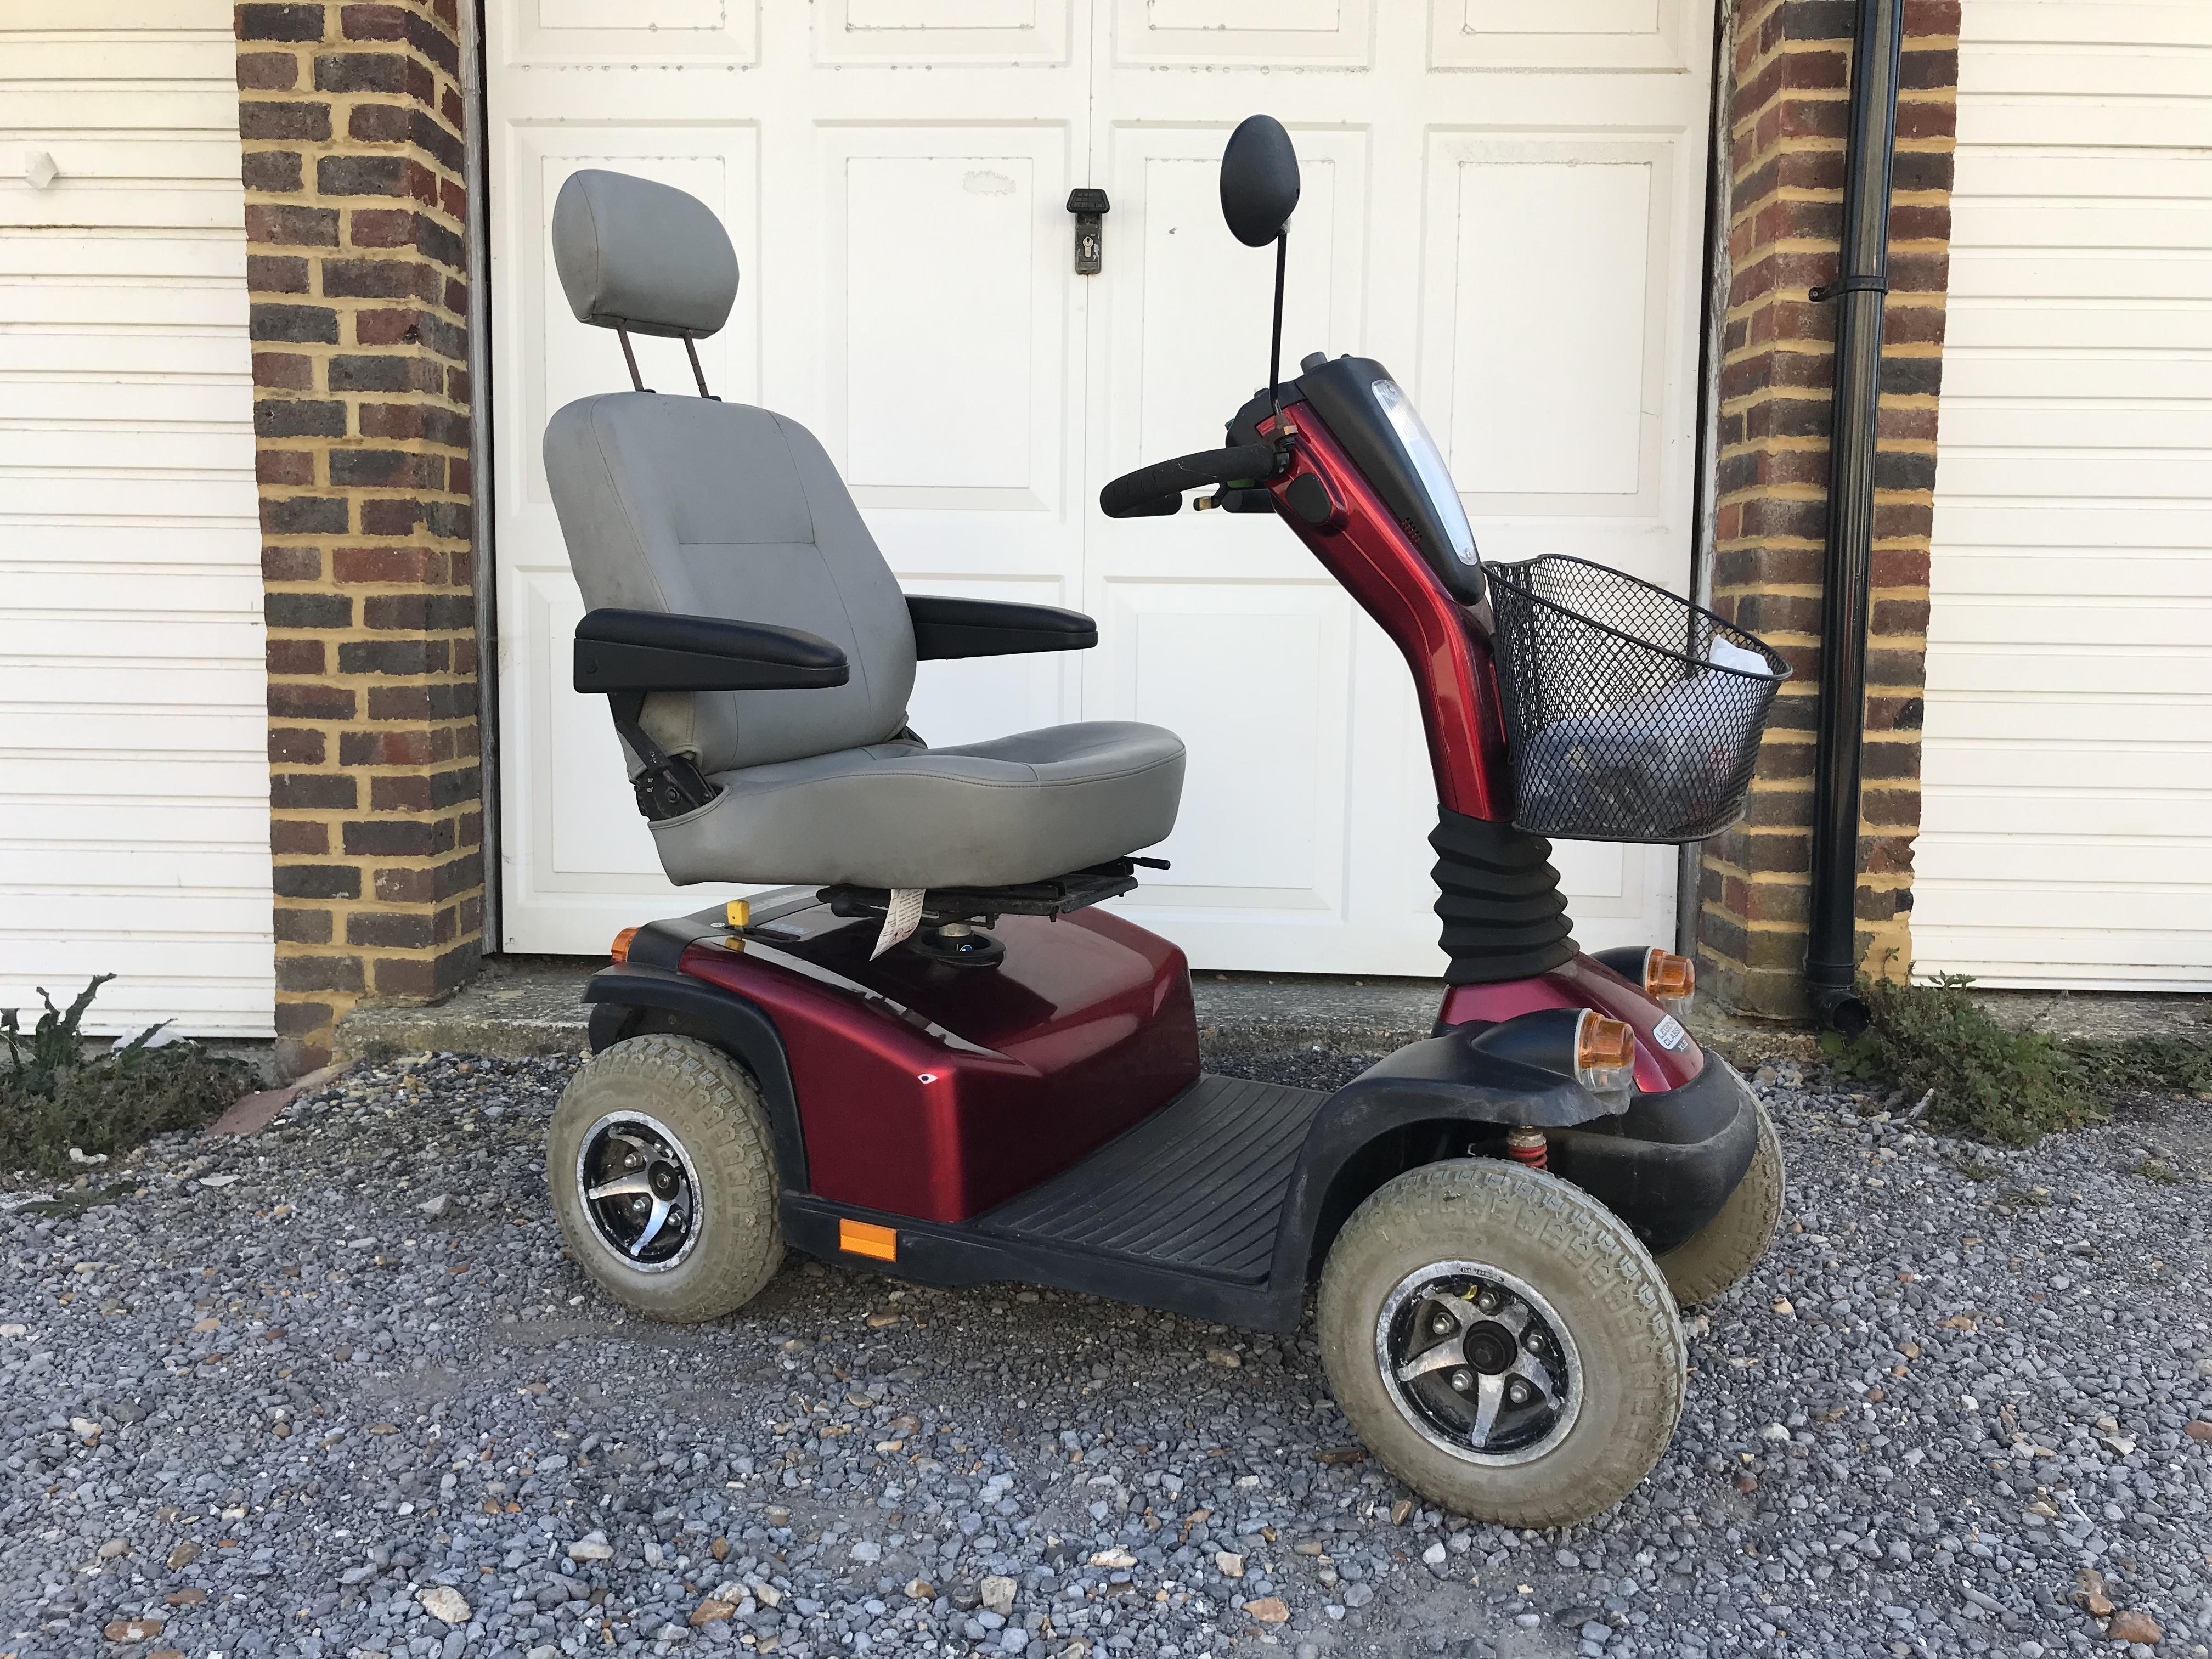 USED - 8mph Pavement Scooter - Pride Legend Classic XL8